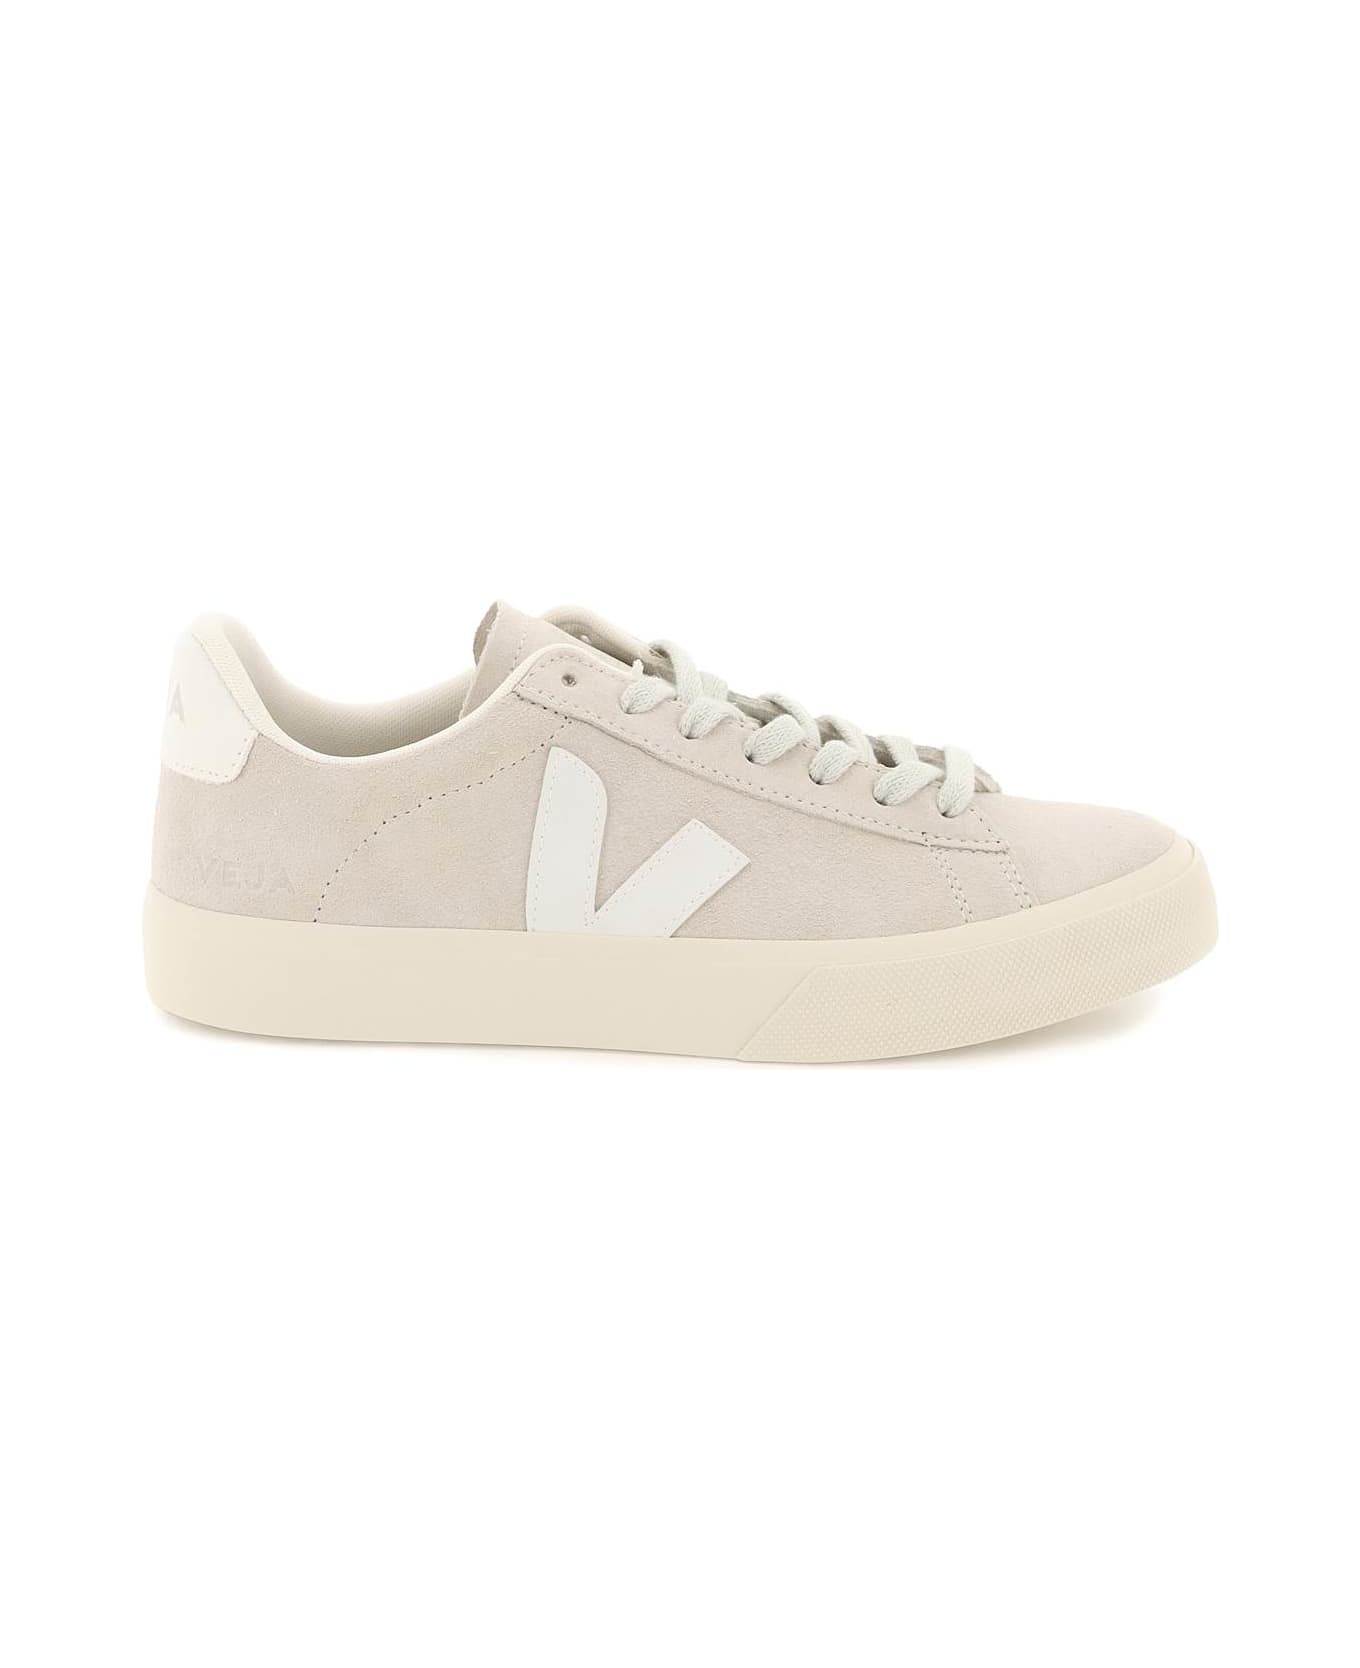 Veja Chromefree Leather Campo Sneakers - NATURAL WHITE (Grey) スニーカー